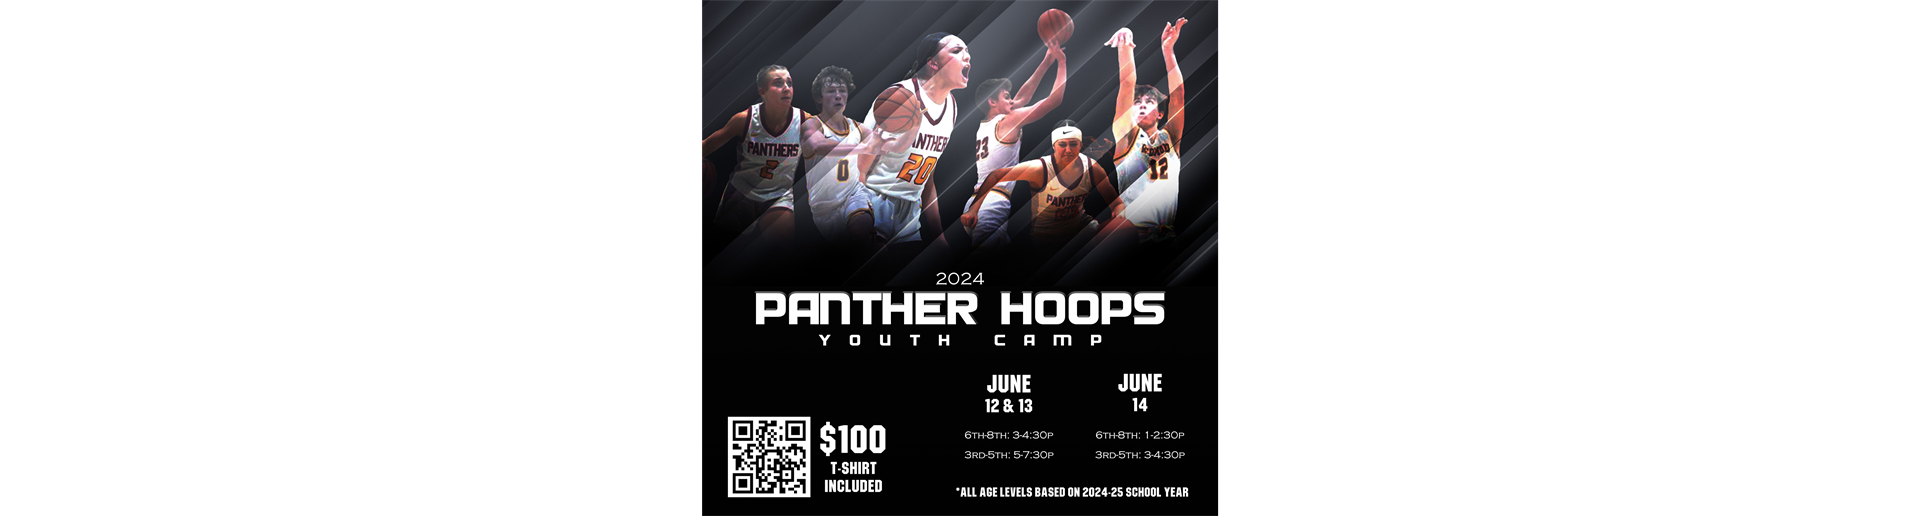 2024 Panther Hoops Youth Camp